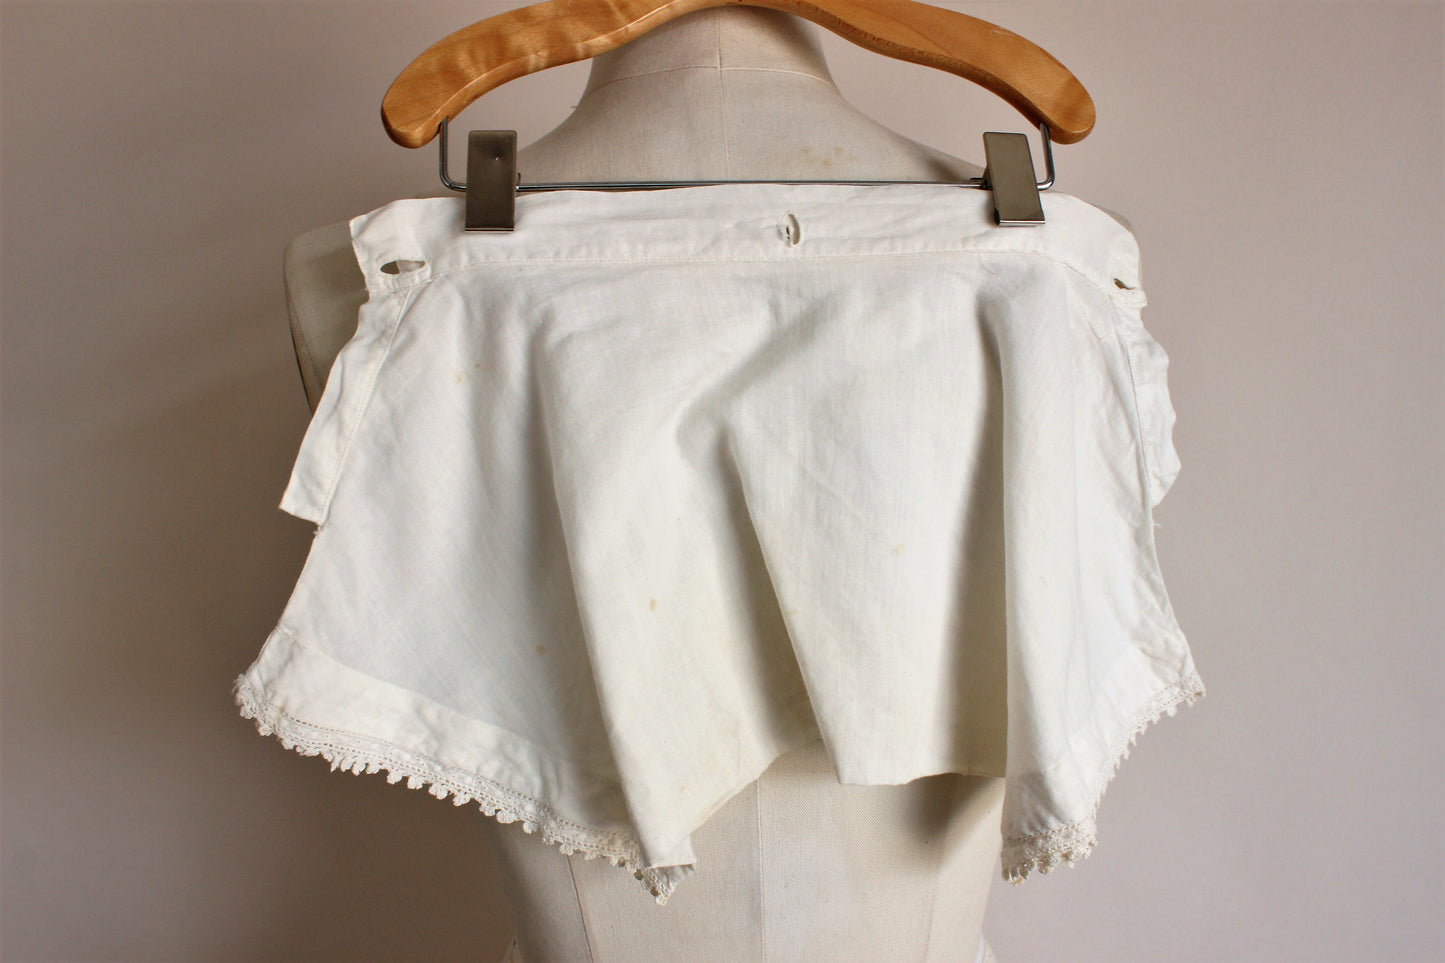 Vintage Edwardian 1900s Child's Bloomers Or Drawers